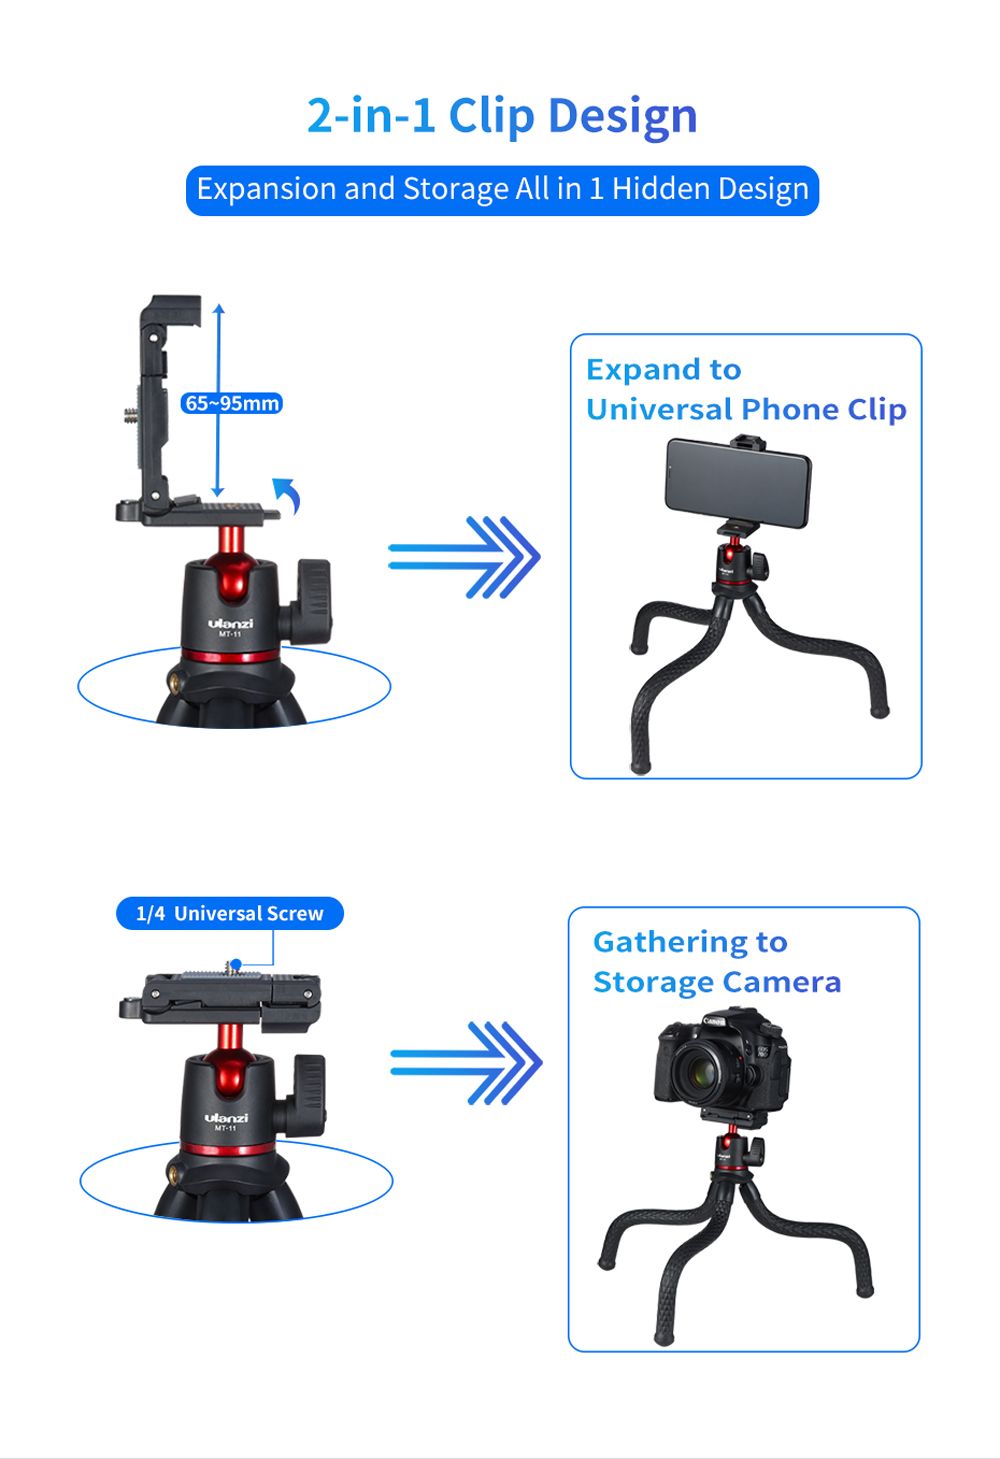 Ulanzi-MT-11-Octopus-Flexible-12KG-Payload-Black-Tripod-with-2-in-1-Phone-Clip-for-DSLR-Camera-Smart-1656111